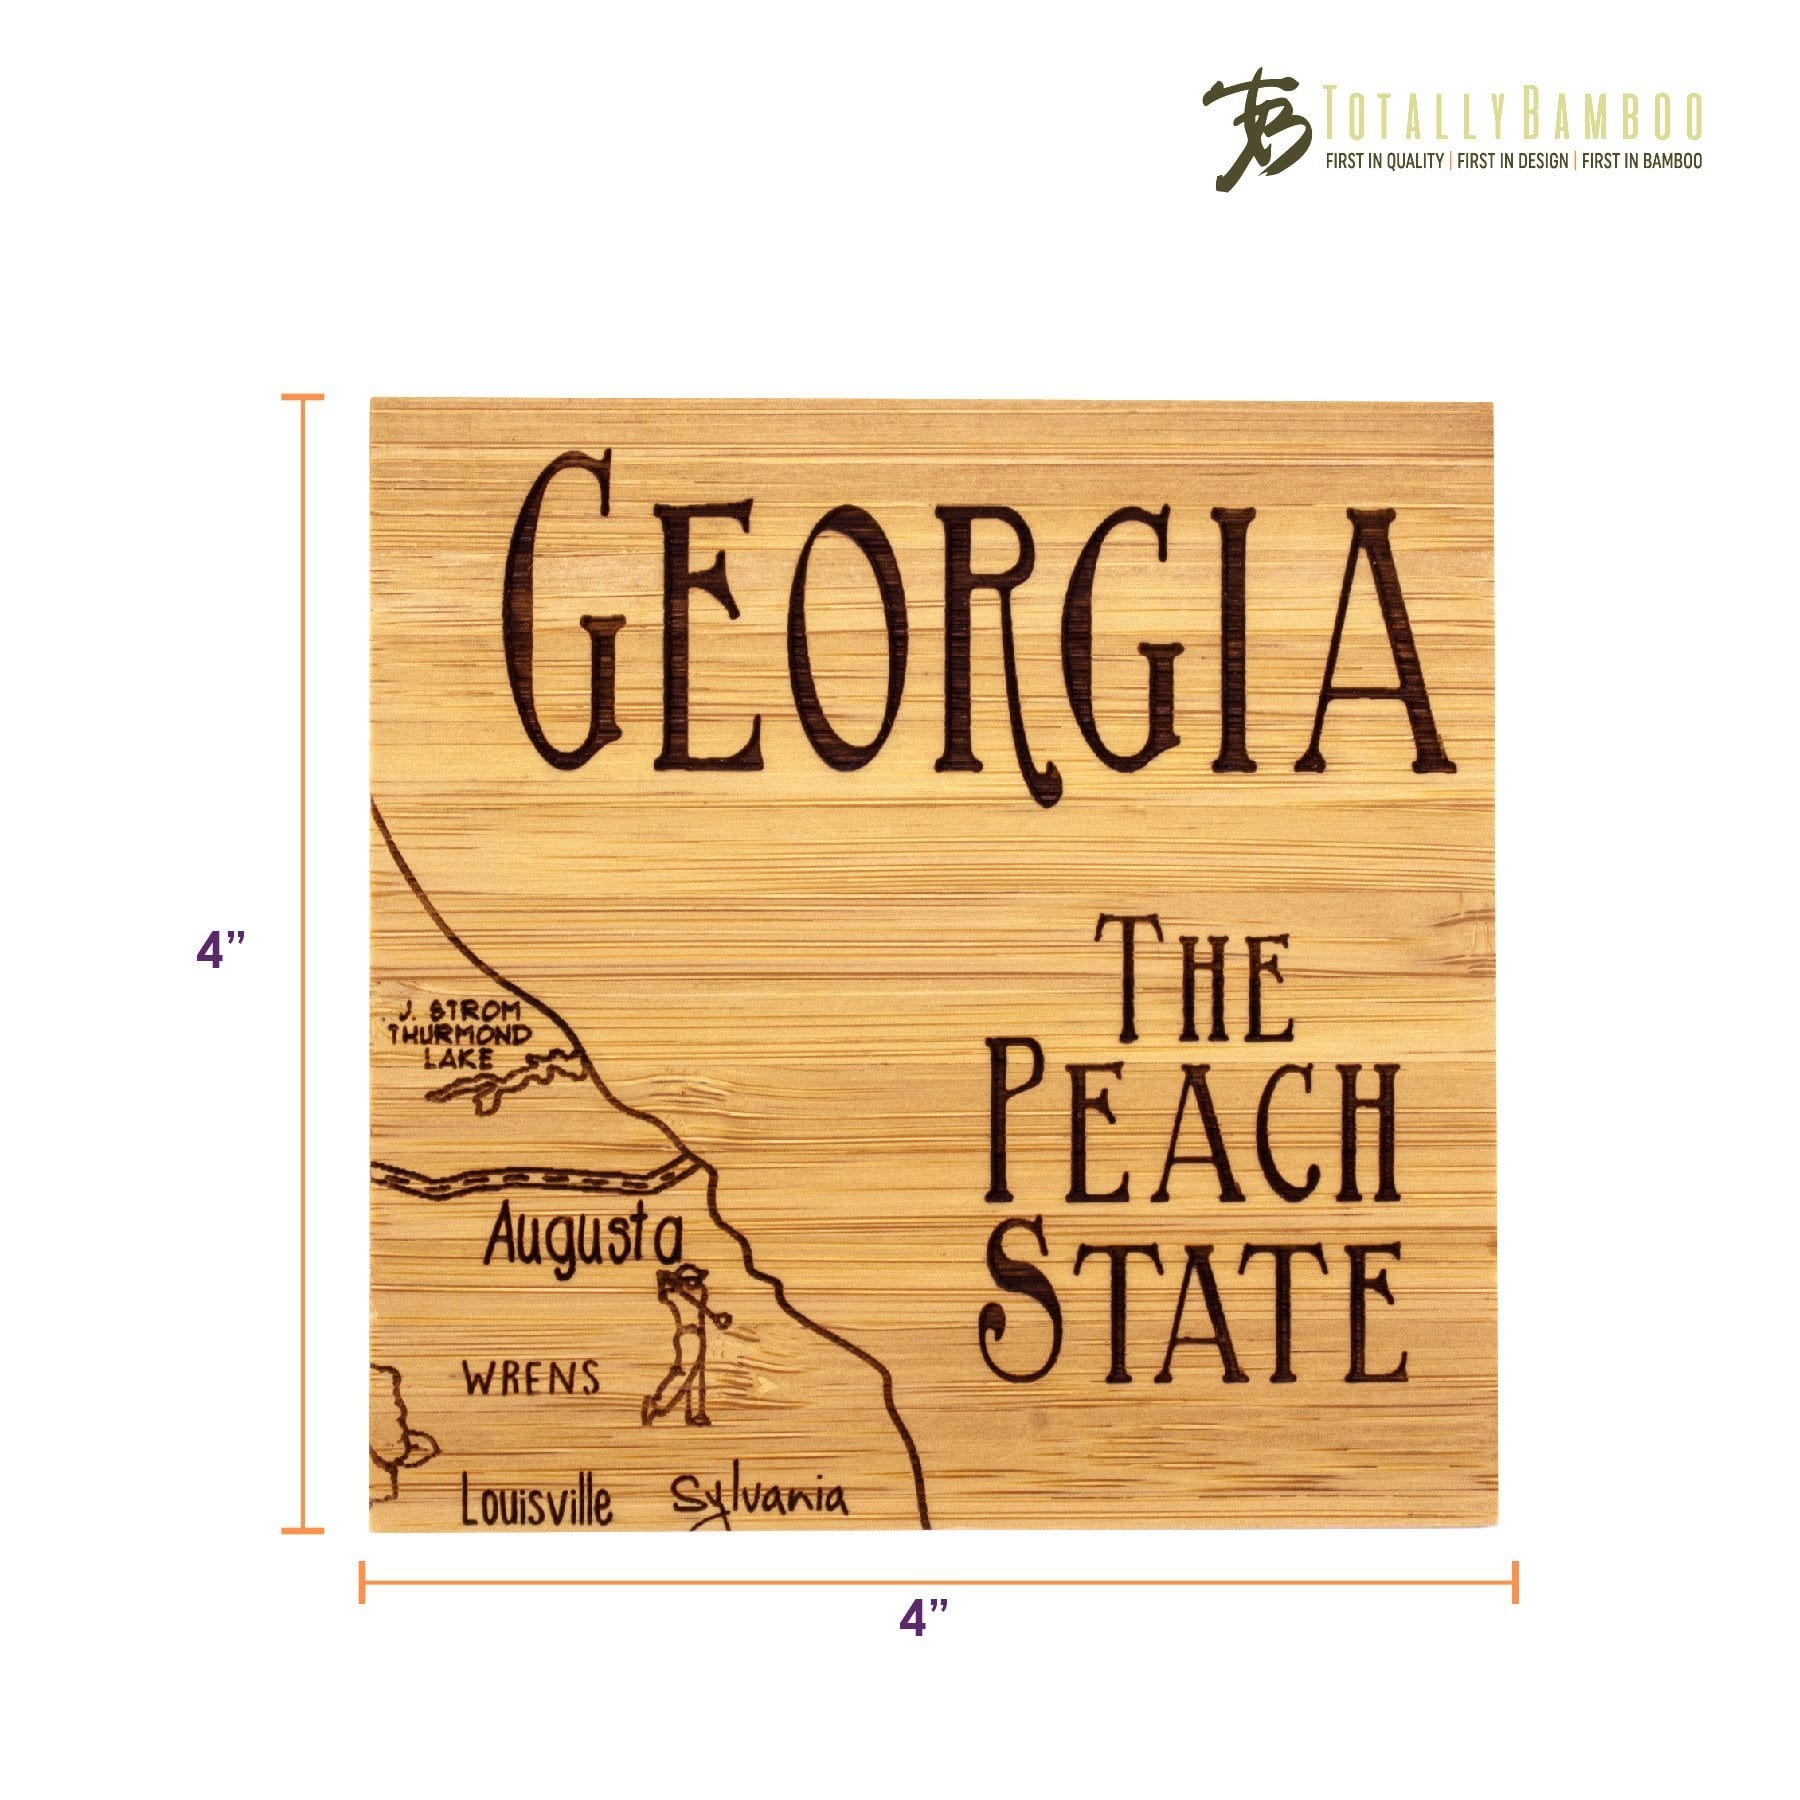 Totally Bamboo Georgia State Puzzle 4-Pc. Coaster Set with Case